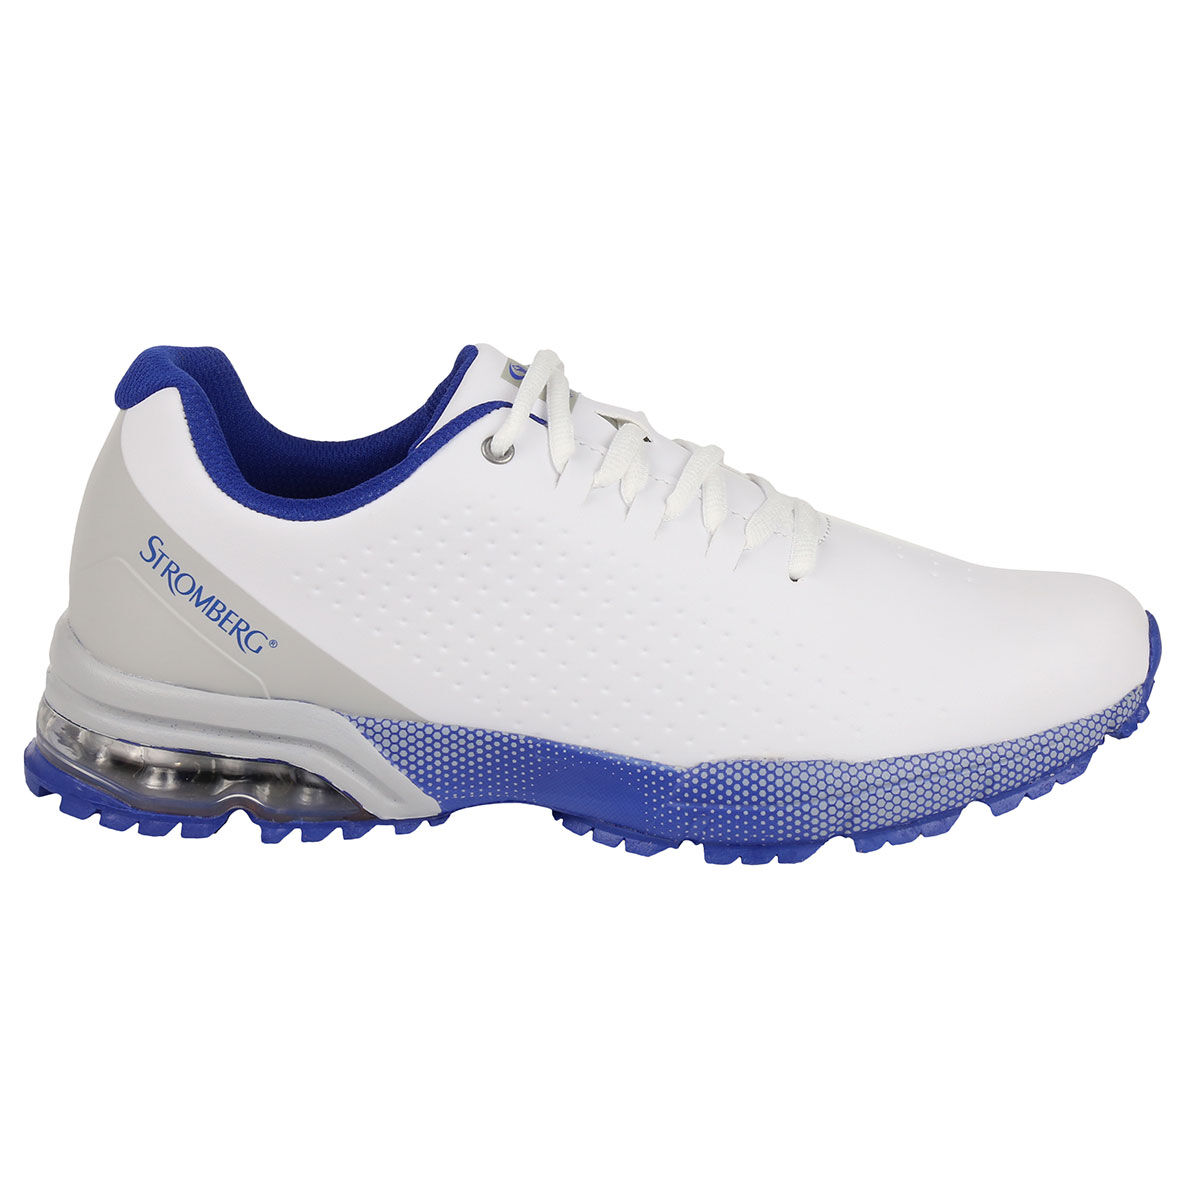 Stromberg White and Blue Waterproof Ailsa Spikeless Golf Shoes, Size: 9 | American Golf von Stromberg